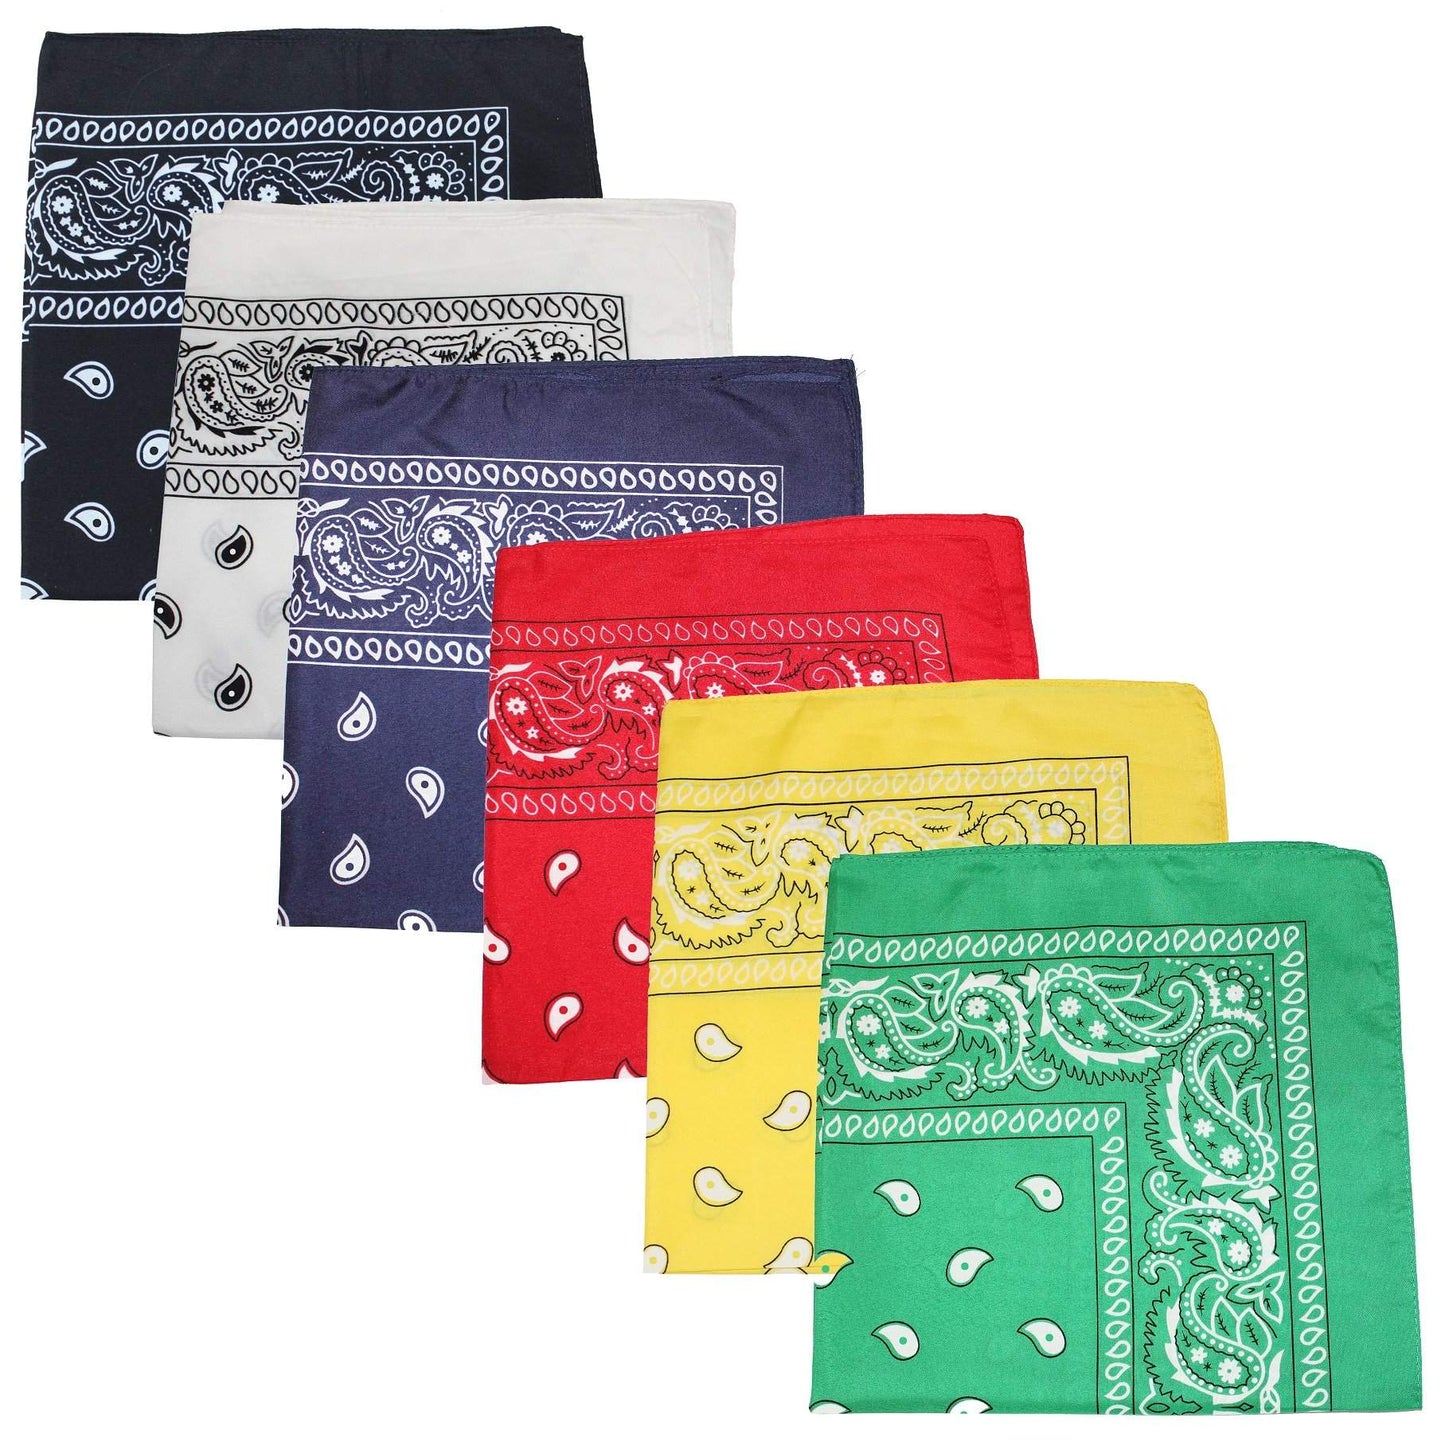 Pack of 20 XL Non Fading Paisley Polyester Bandanas 27 x 27 In - Bulk Wholesale